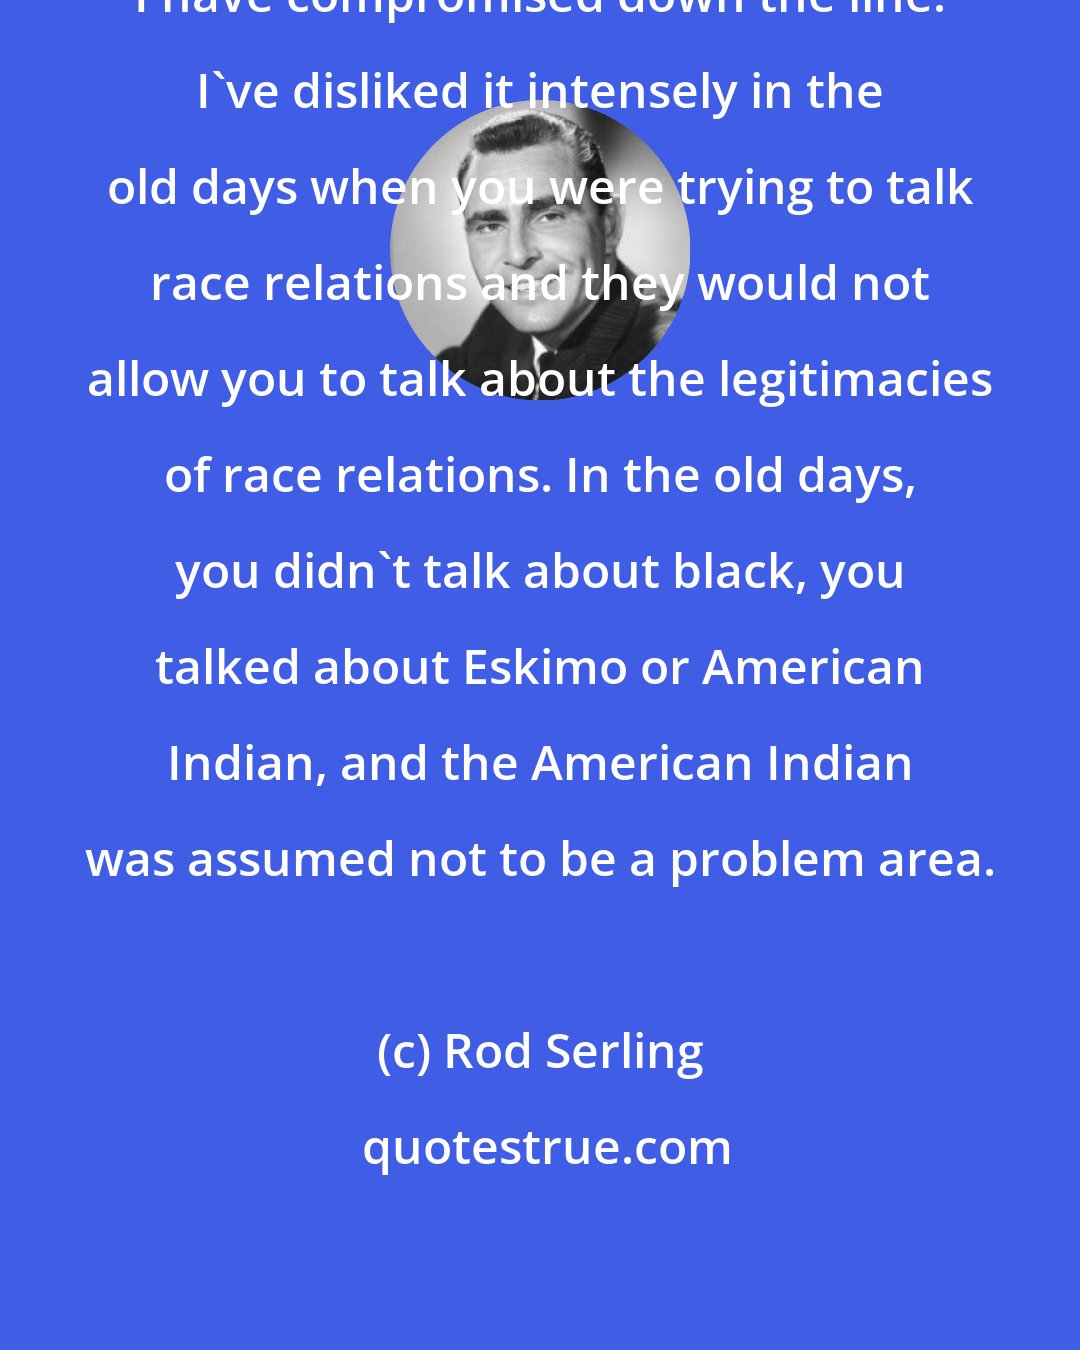 Rod Serling: I have compromised down the line. I've disliked it intensely in the old days when you were trying to talk race relations and they would not allow you to talk about the legitimacies of race relations. In the old days, you didn't talk about black, you talked about Eskimo or American Indian, and the American Indian was assumed not to be a problem area.